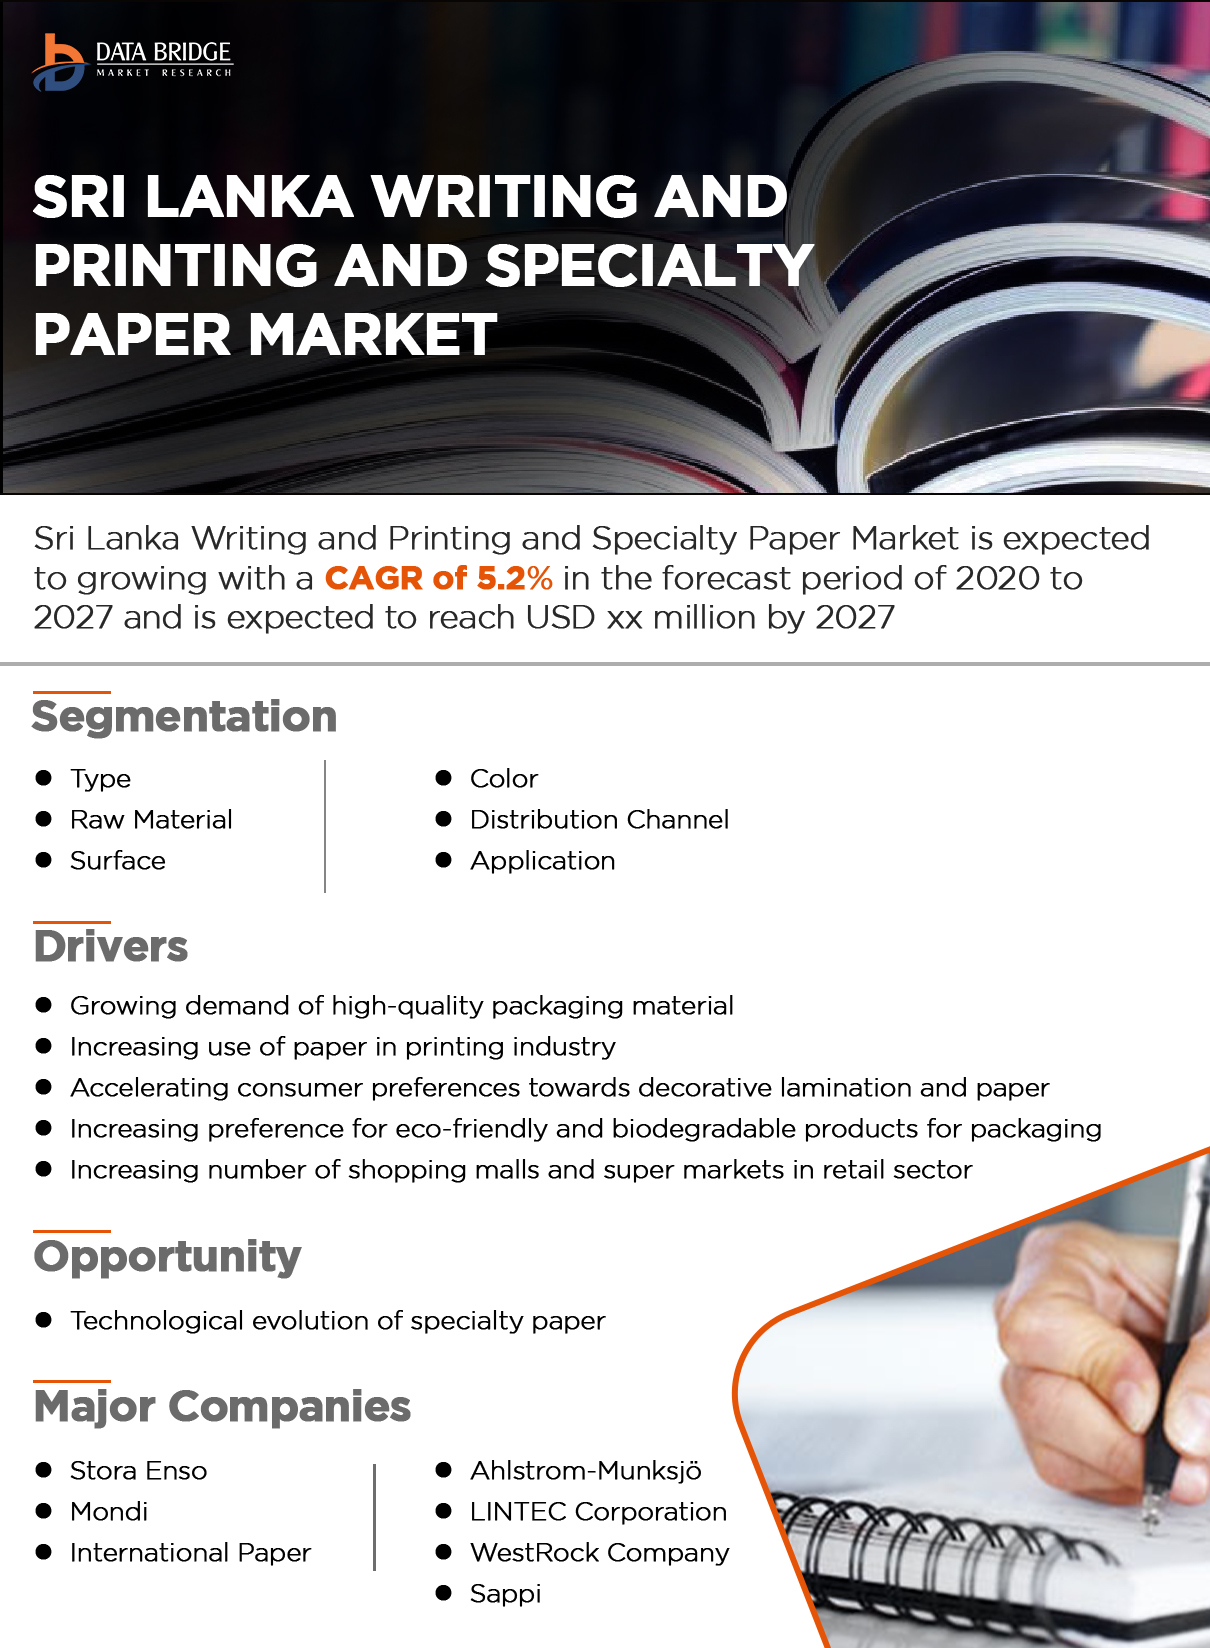 SriLanka Writing and Printing and Specialty Paper Market